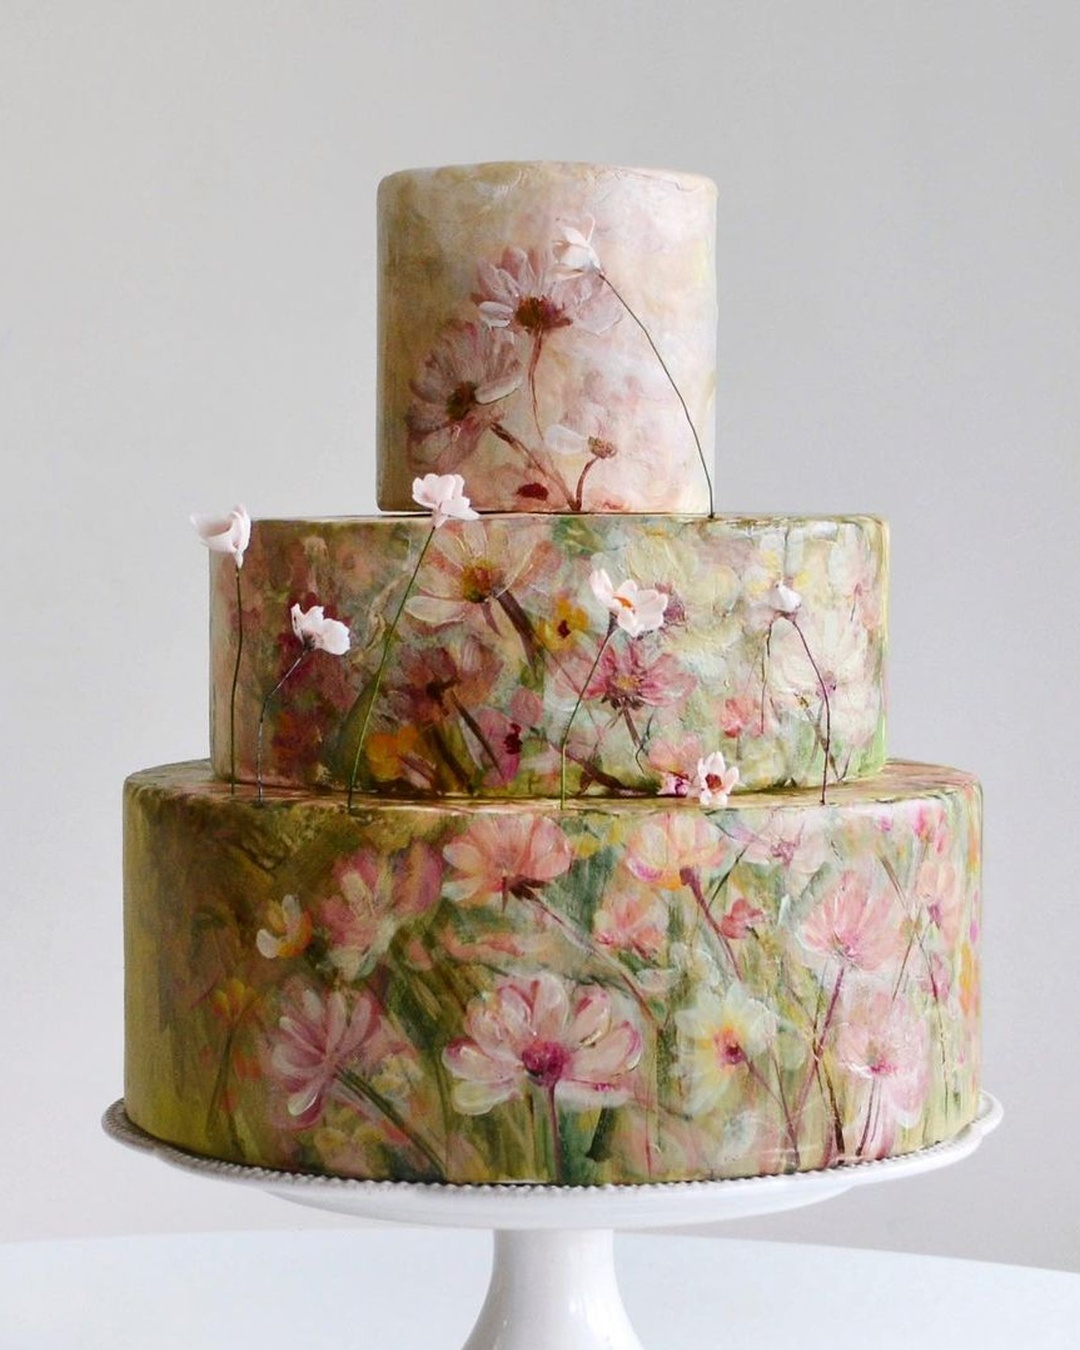 London Wedding Cakes: The 25 Best Wedding Cake Shops in London -  hitched.co.uk - hitched.co.uk